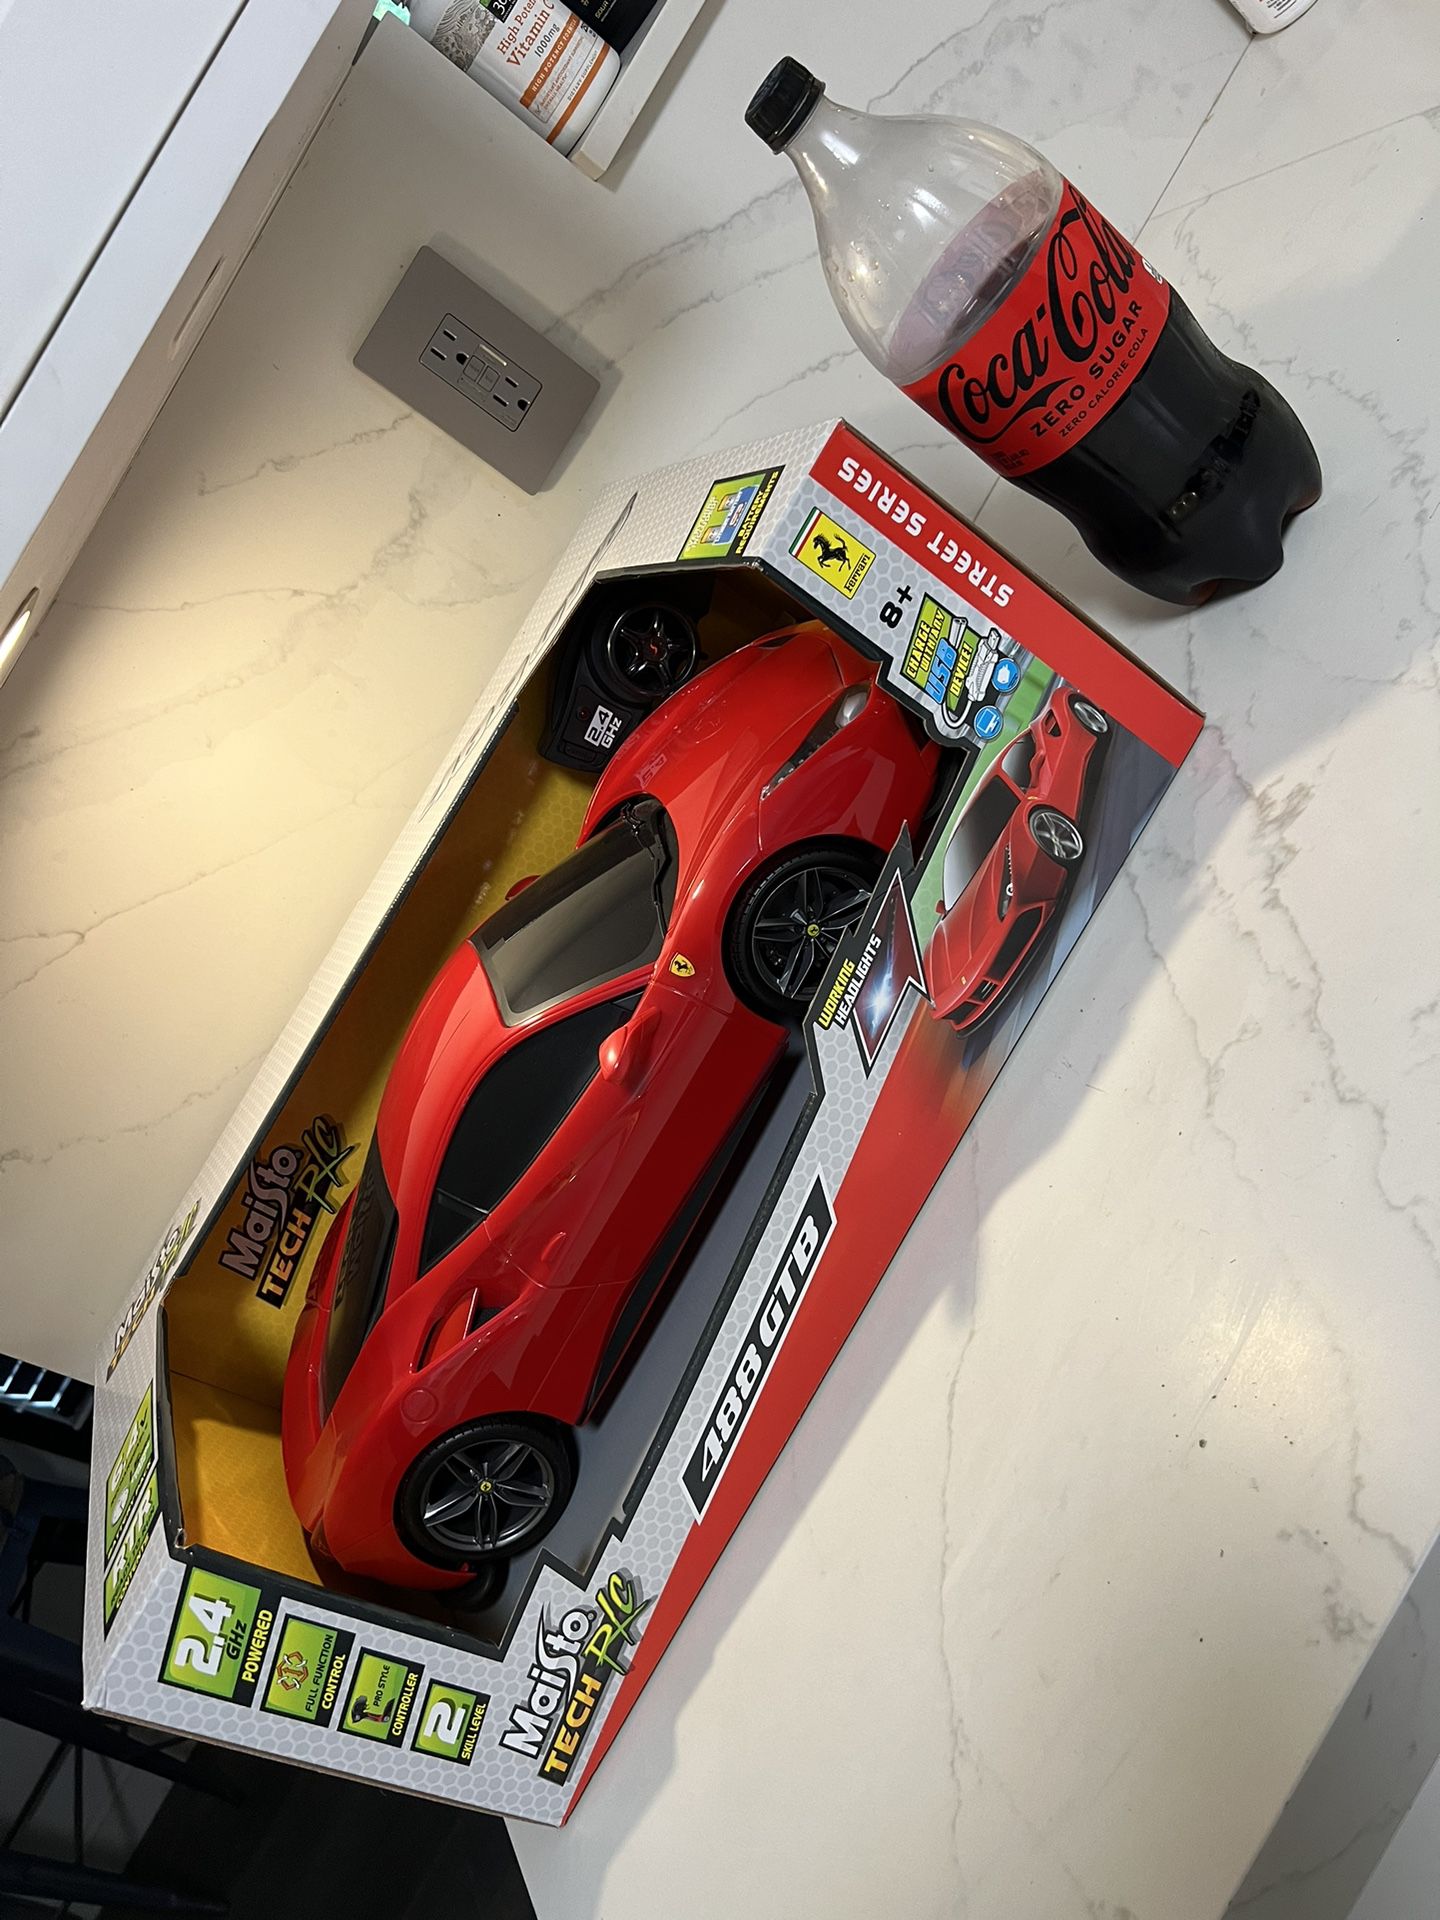 Huge 1/6 Scale RC Ferrari 488 New In Box RTR Detailed Licensed 